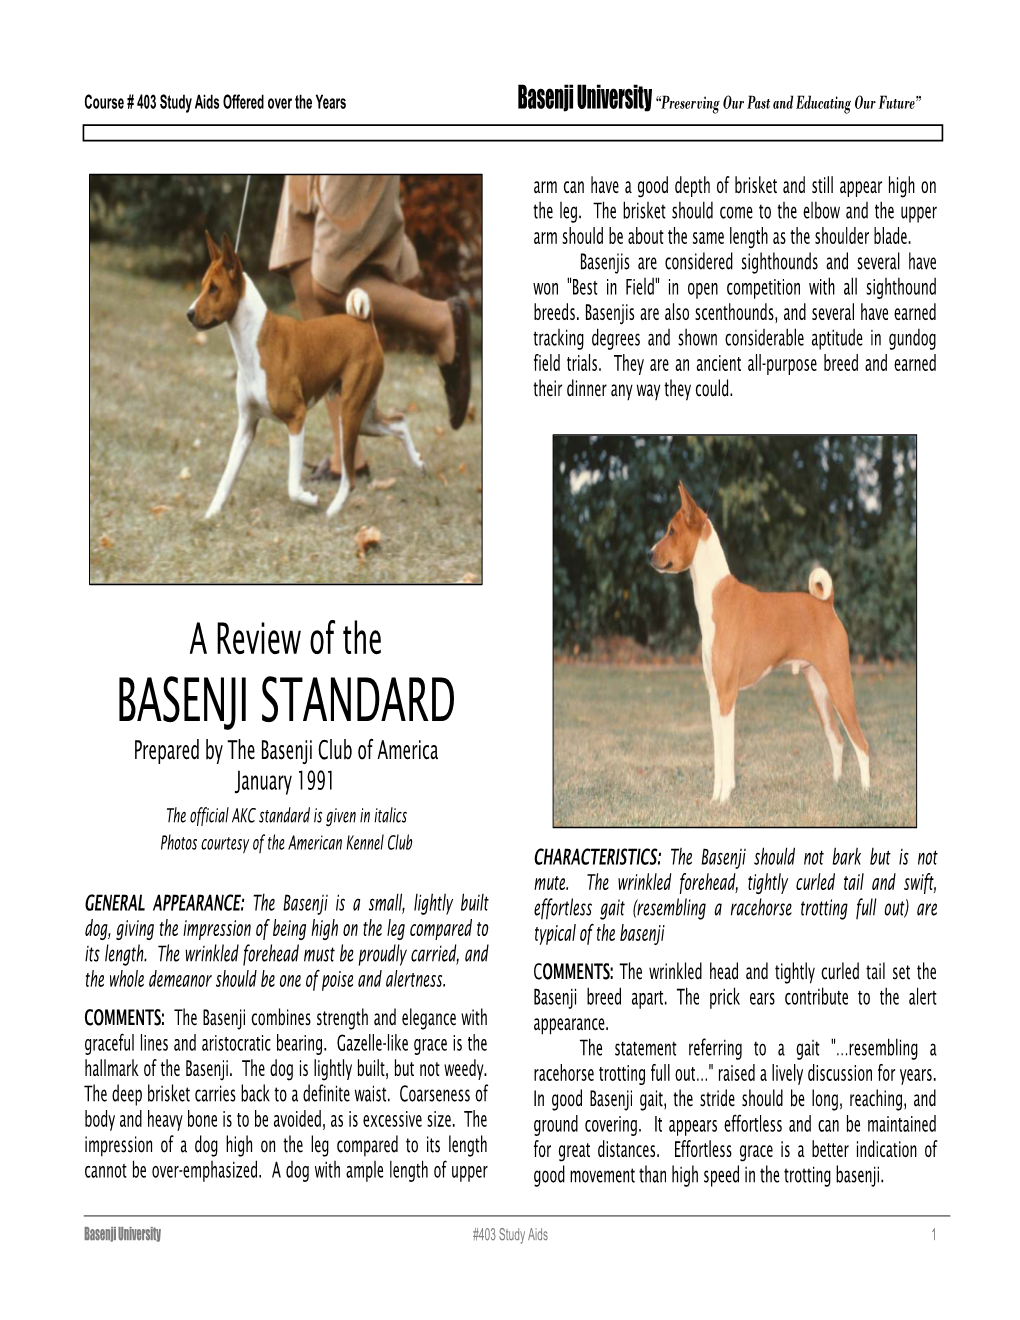 The Review of the Basenji Standard